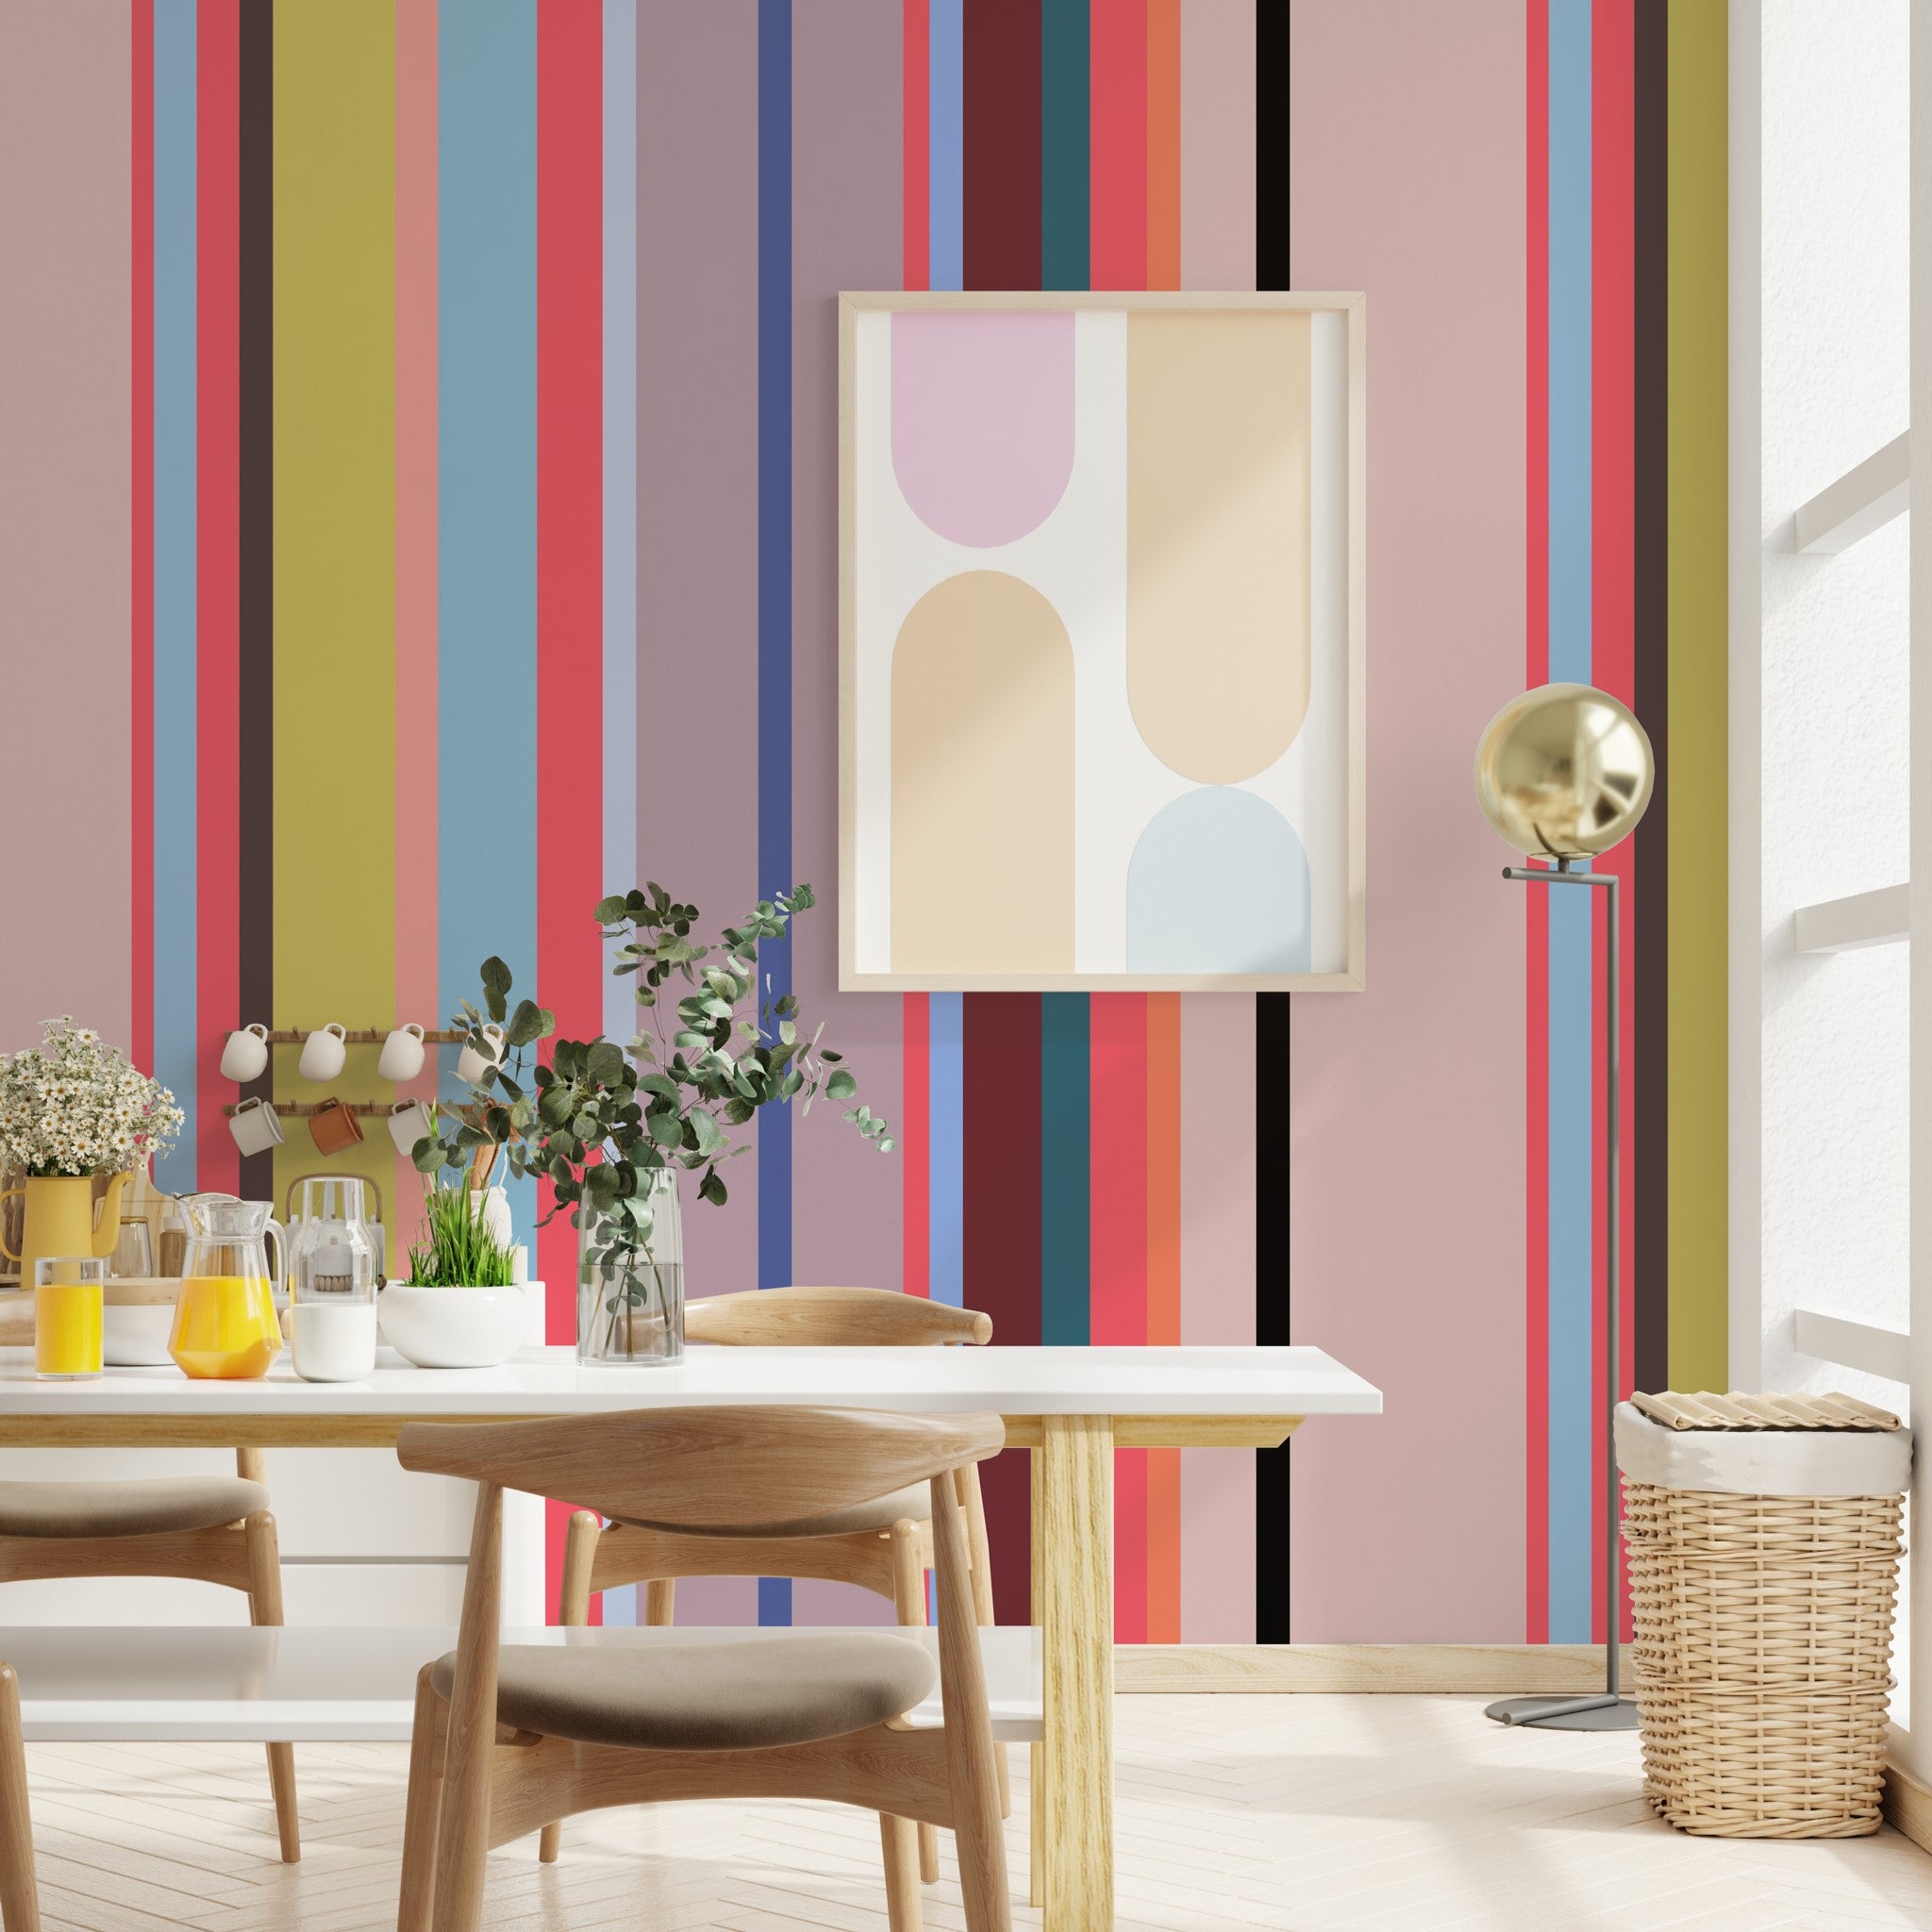 "Wall Blush's So Fetch Wallpaper featuring colorful stripes in a modern dining room setting with stylish decor."